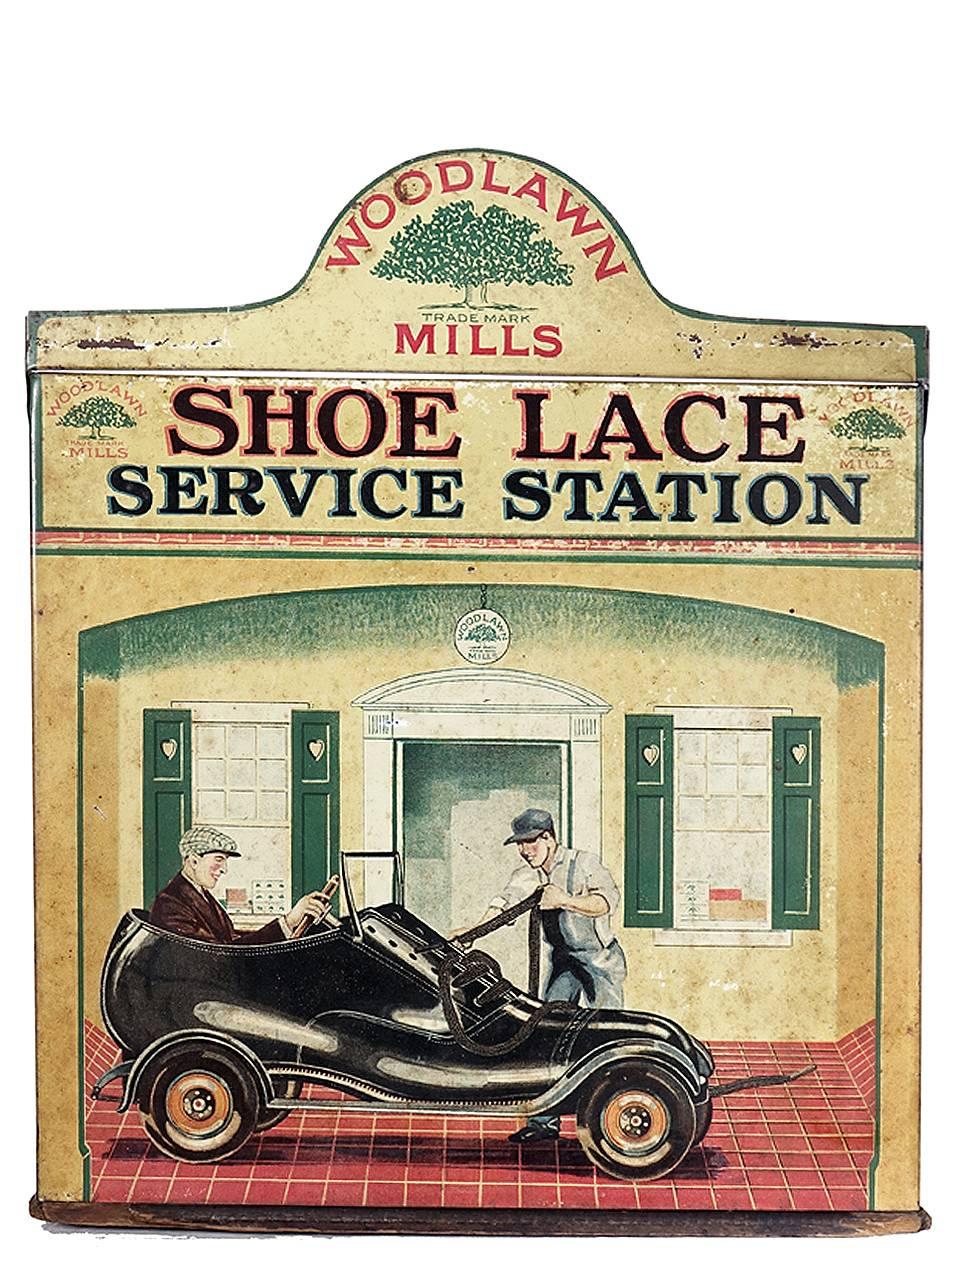 American Shoe Lace Service Station, Very Rare Tin Litho Store Display